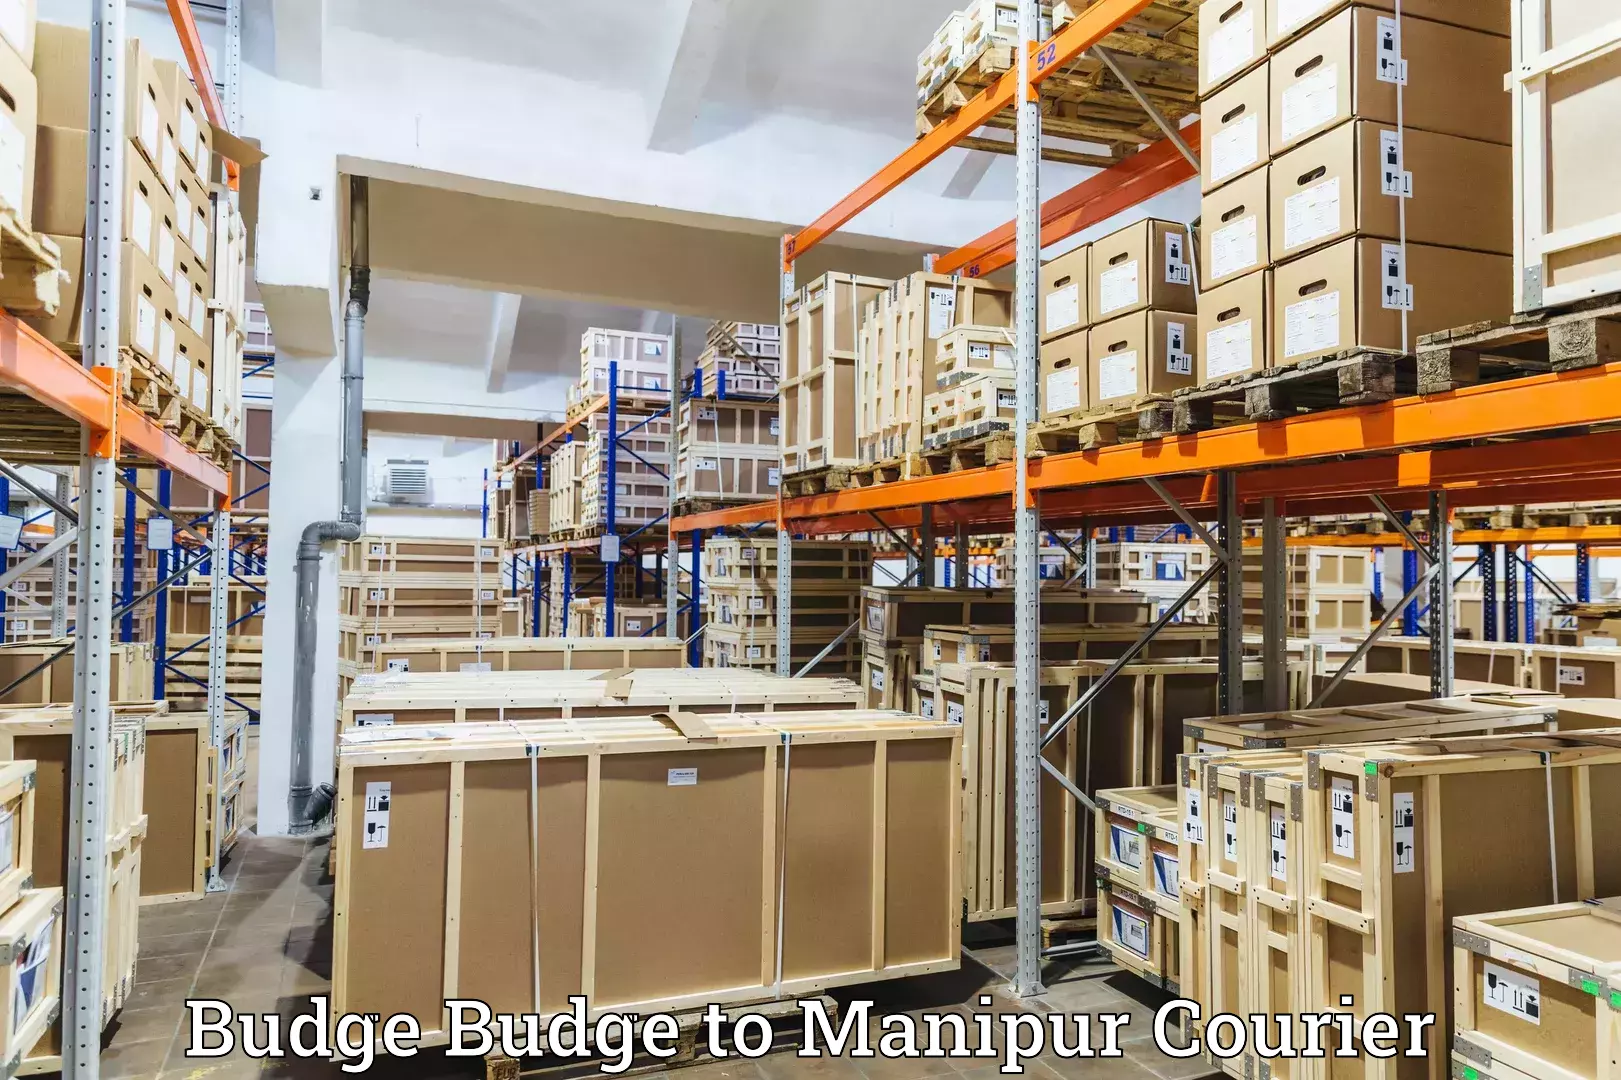 High-priority parcel service Budge Budge to Manipur